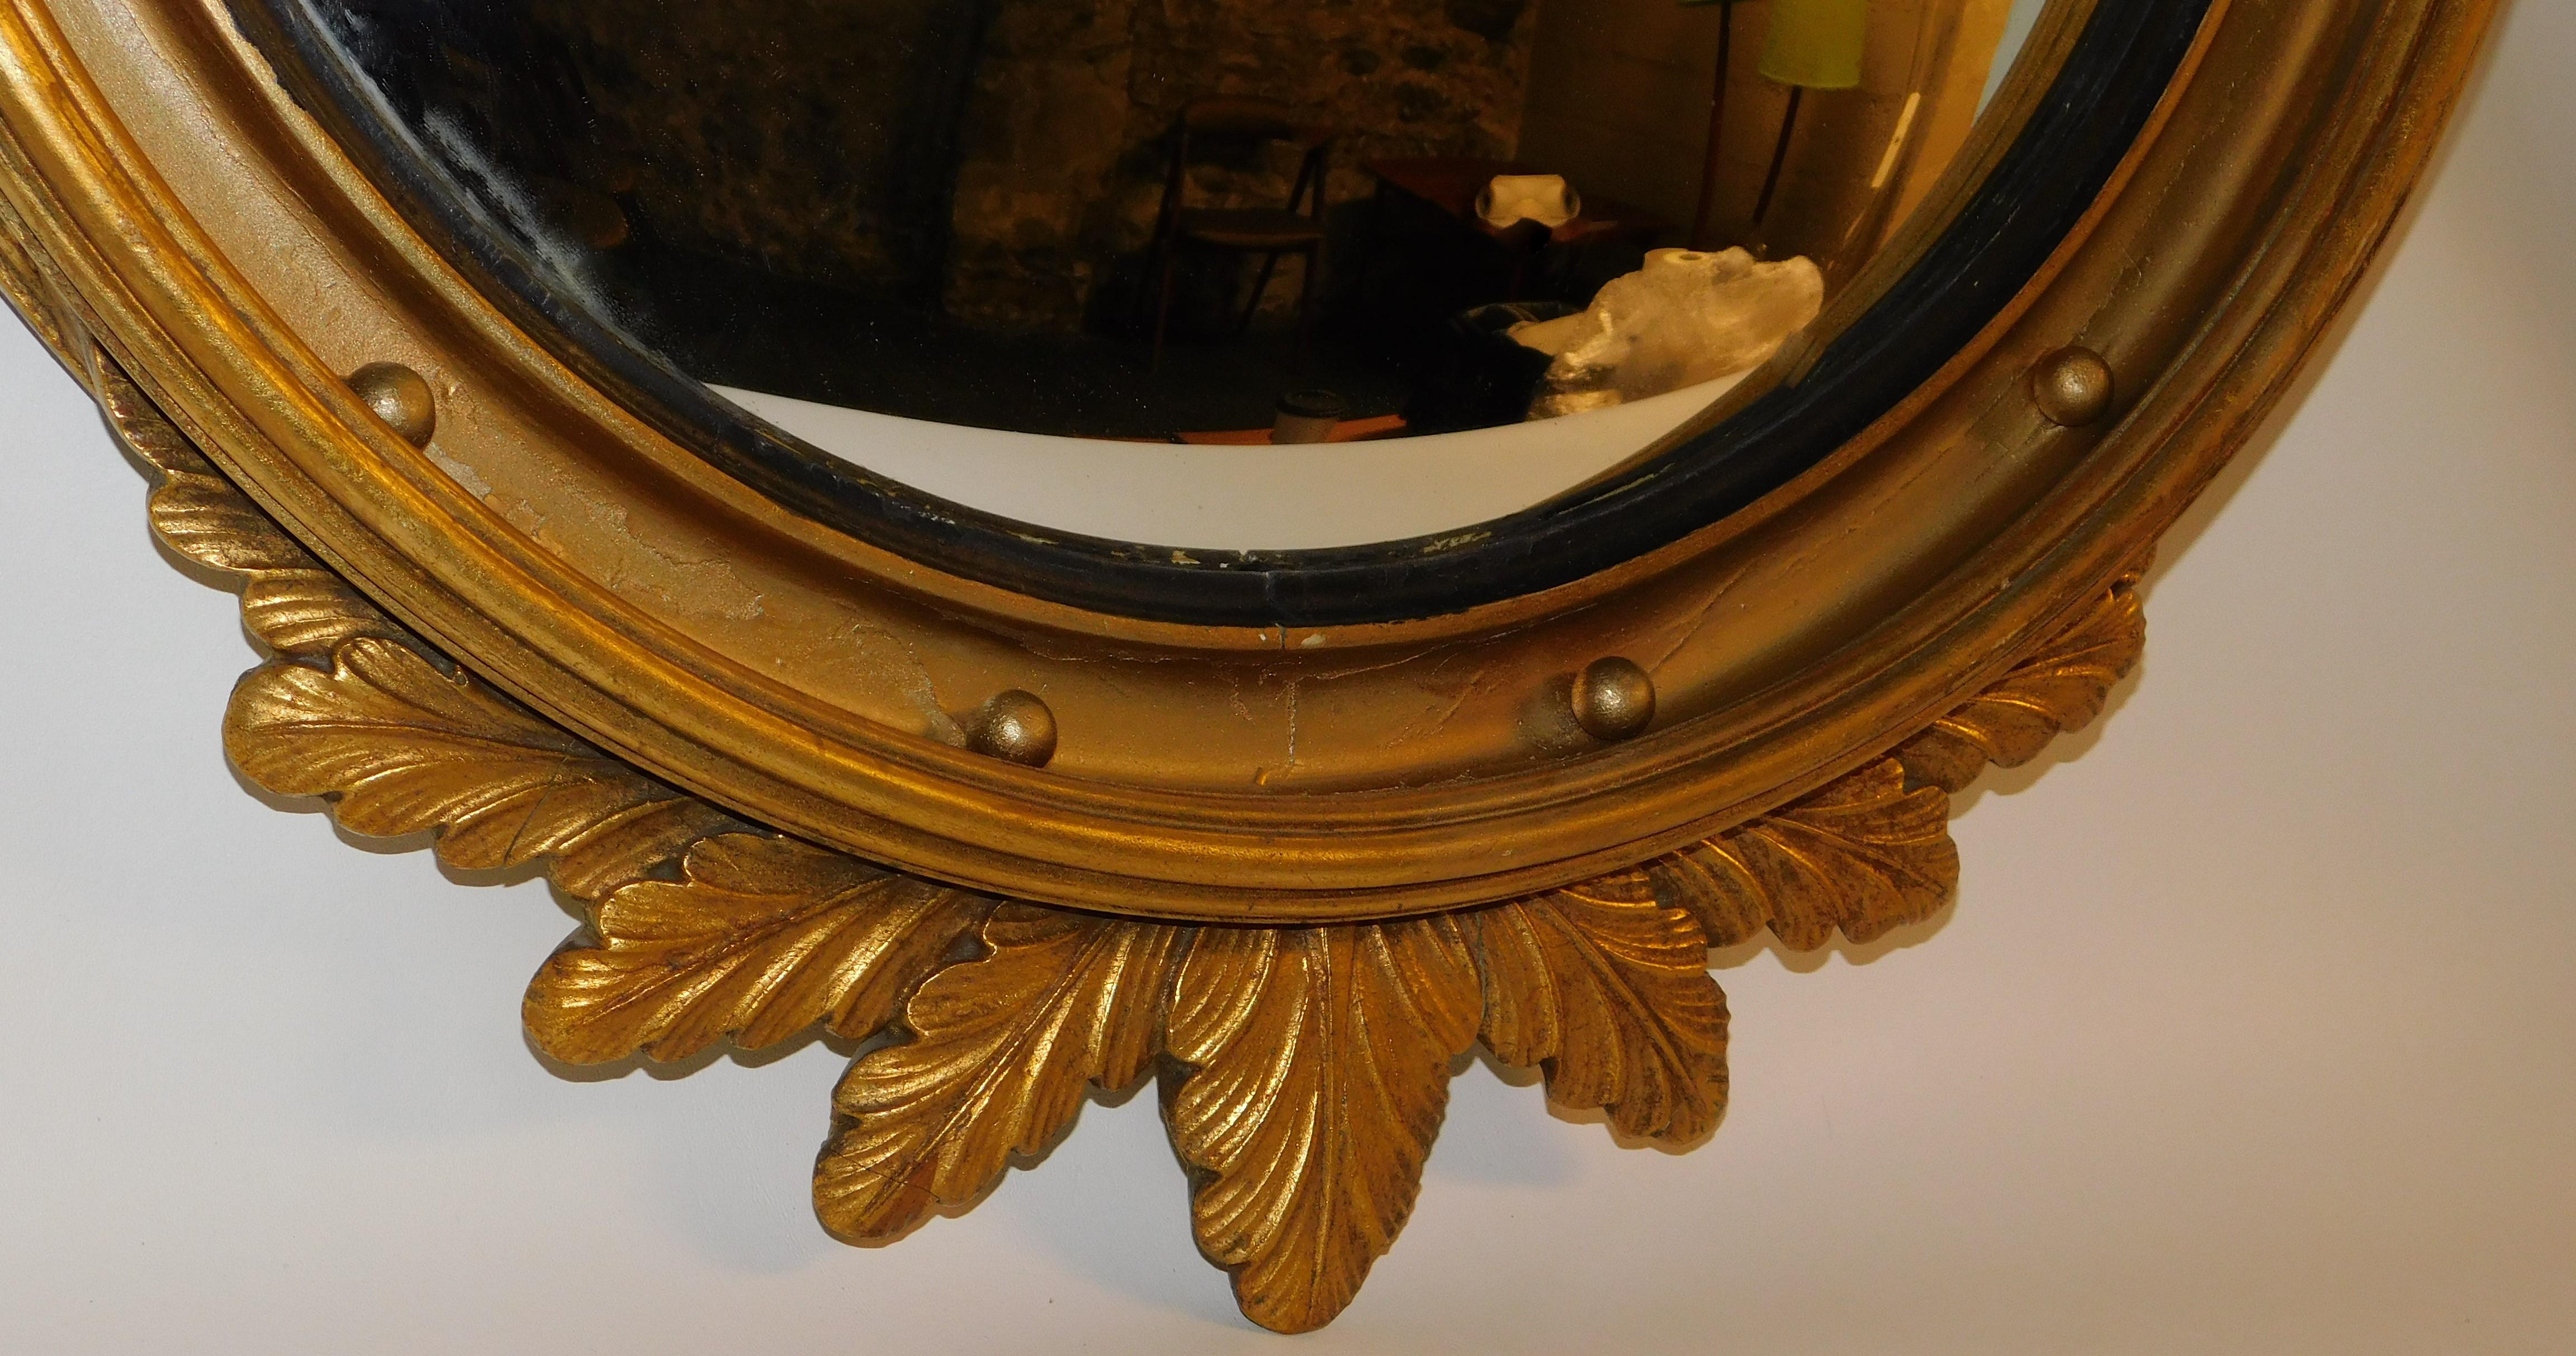 mirror with eagle on top